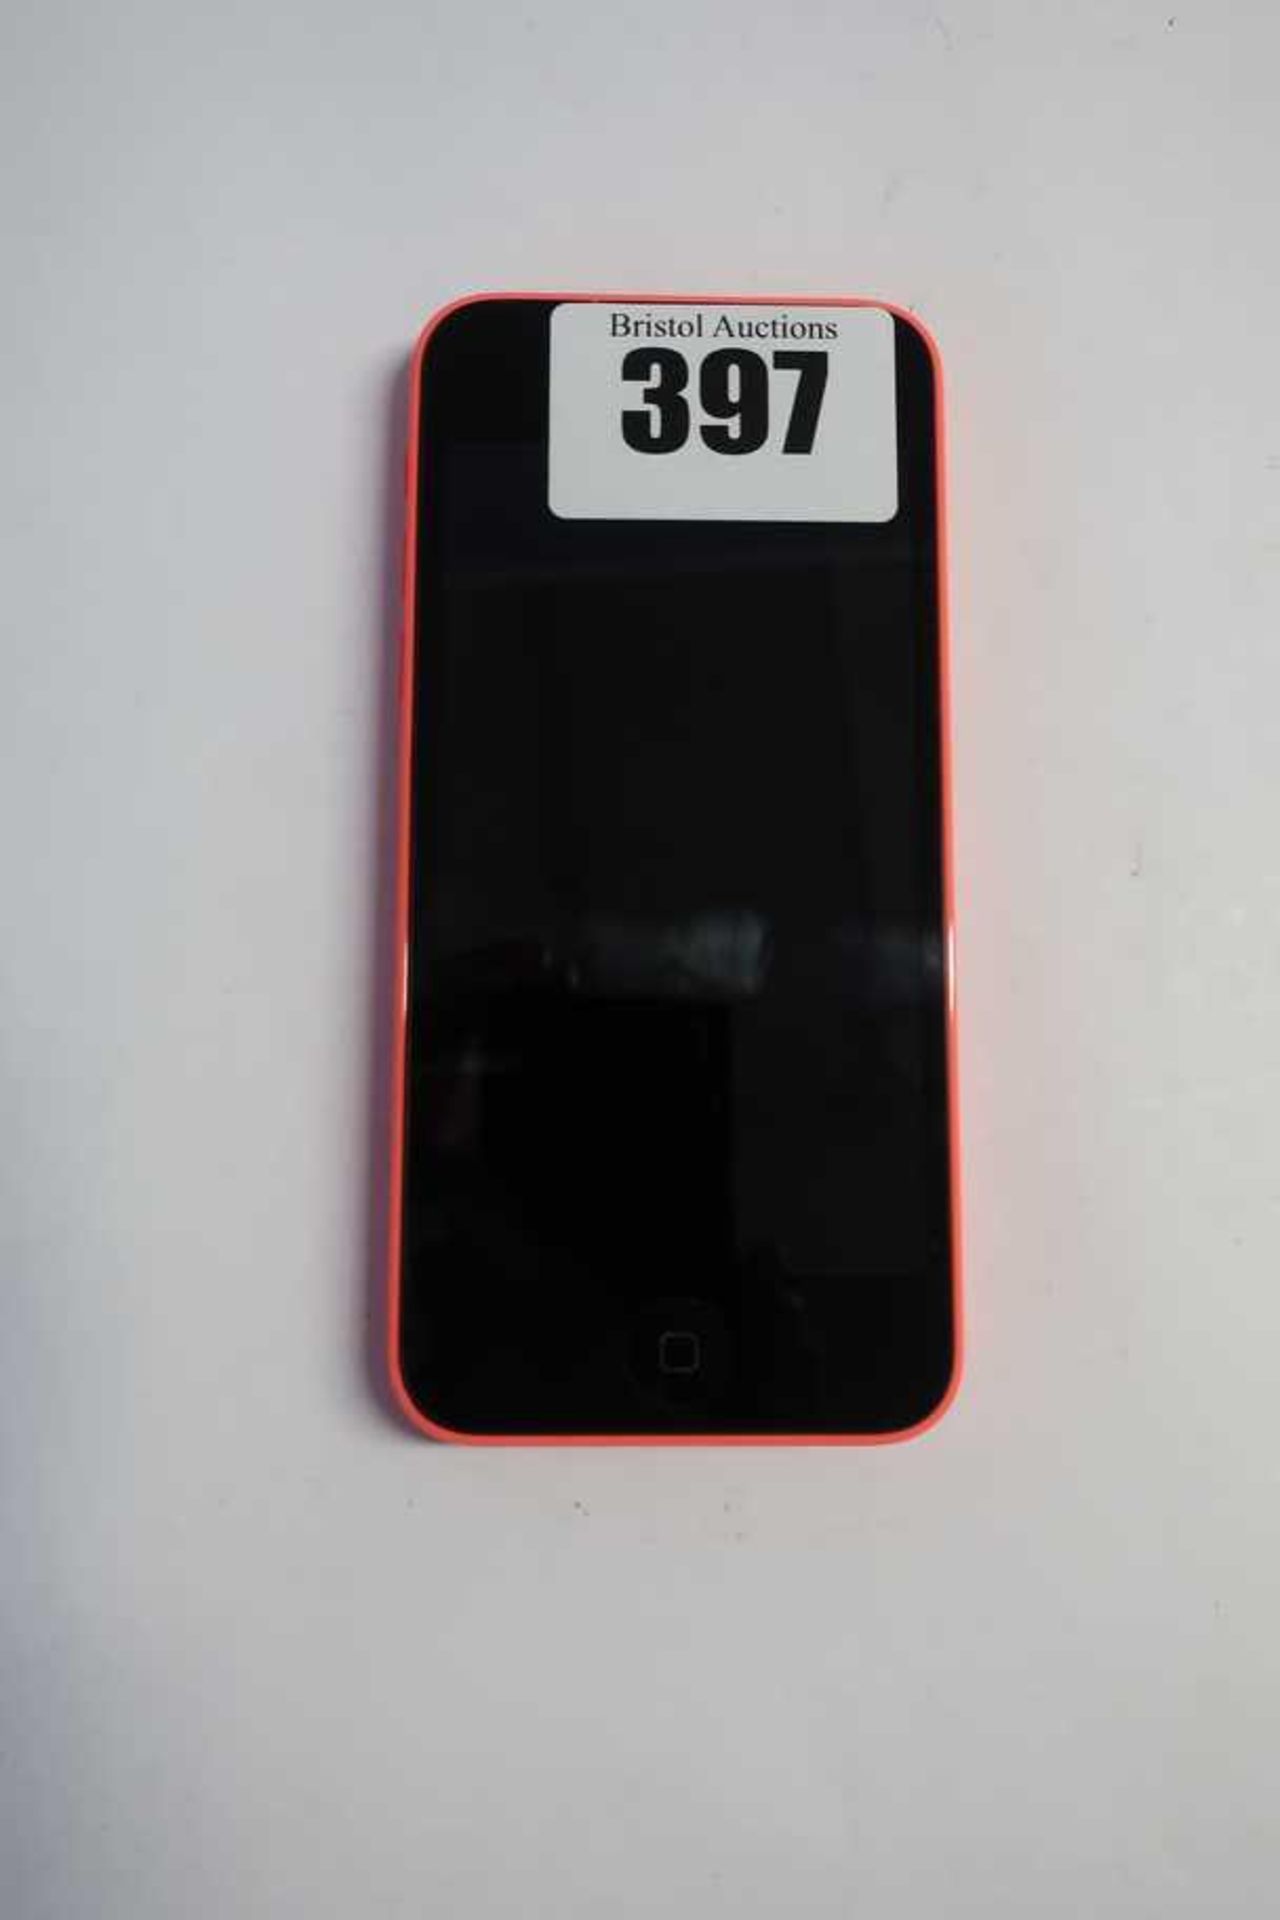 A pre-owned Apple iPhone 5c (GSM/North America/A1532) 16GB in Pink (IMEI: 357991051557501) (